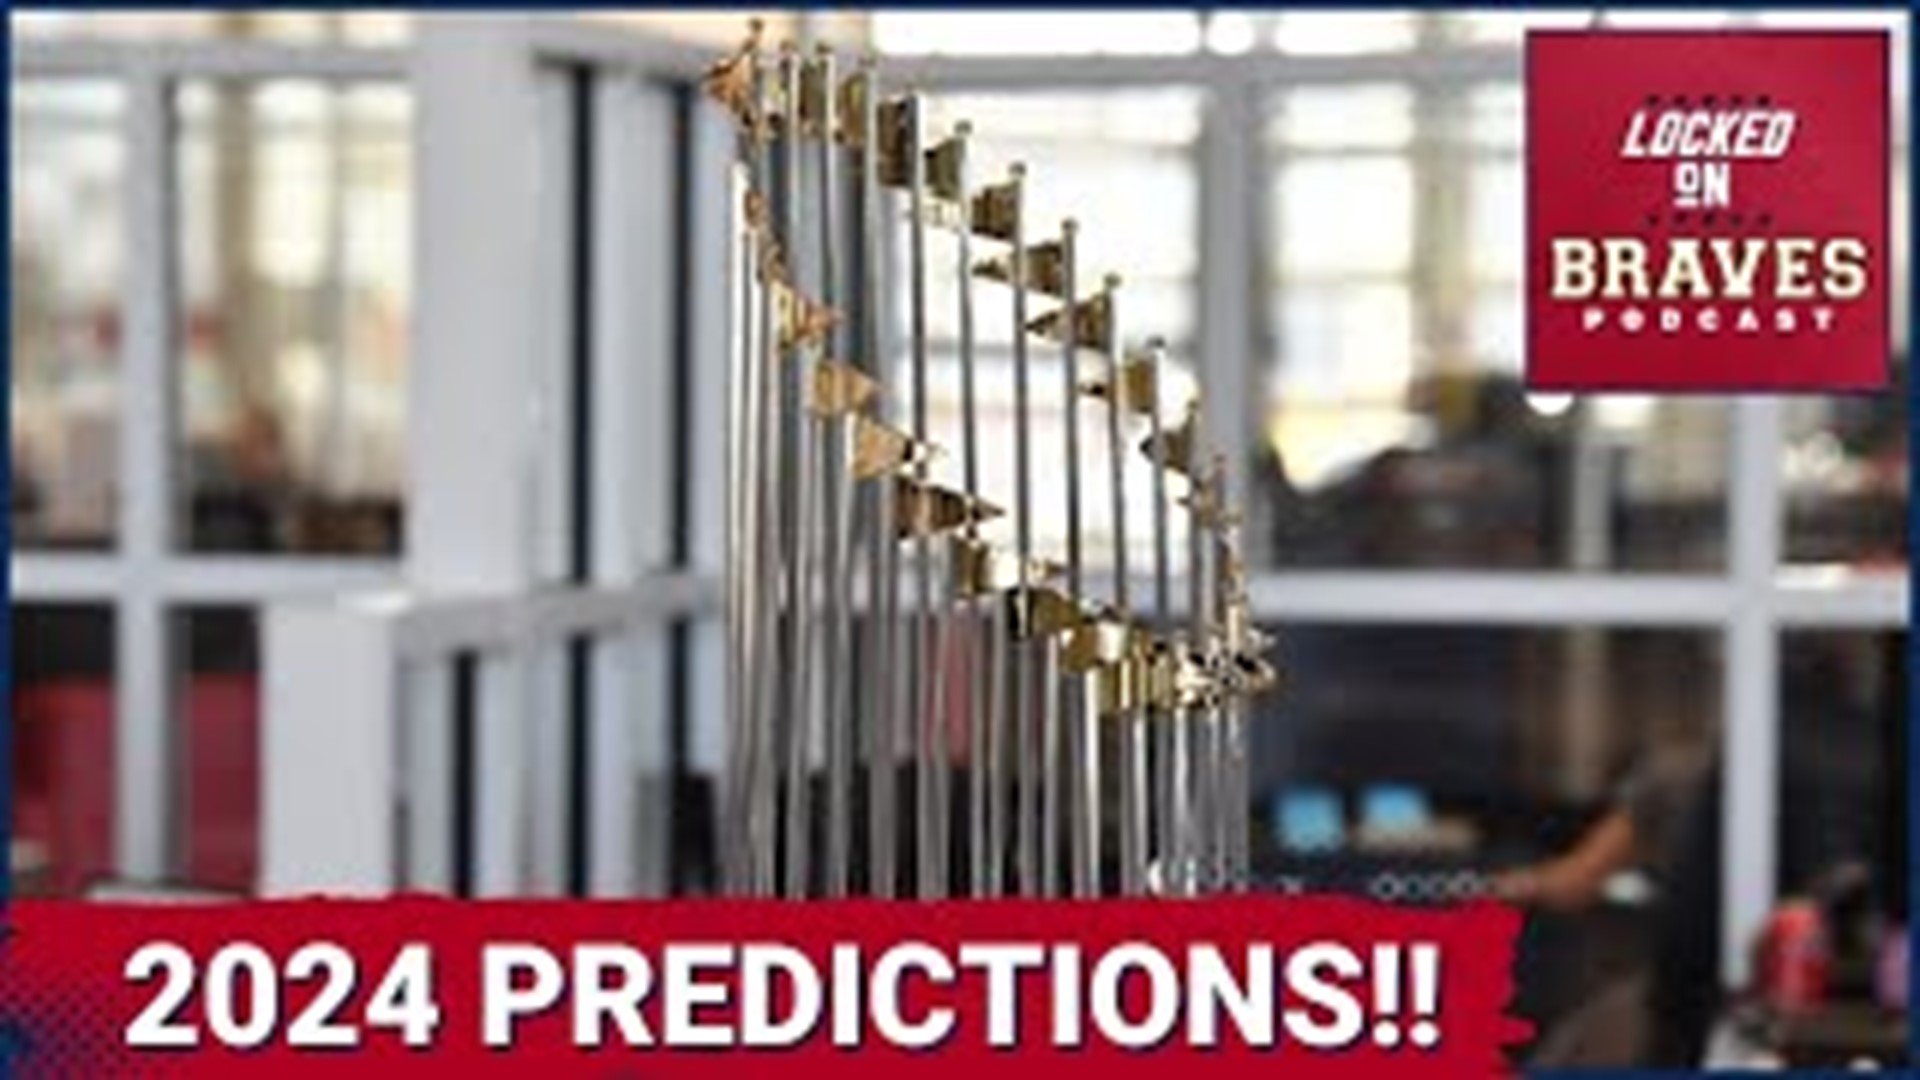 Jake gives his predictions for the upcoming season for the Atlanta Braves and the rest of Major League Baseball. 

Will Ronald Acuńa Jr. hit 50 home runs?